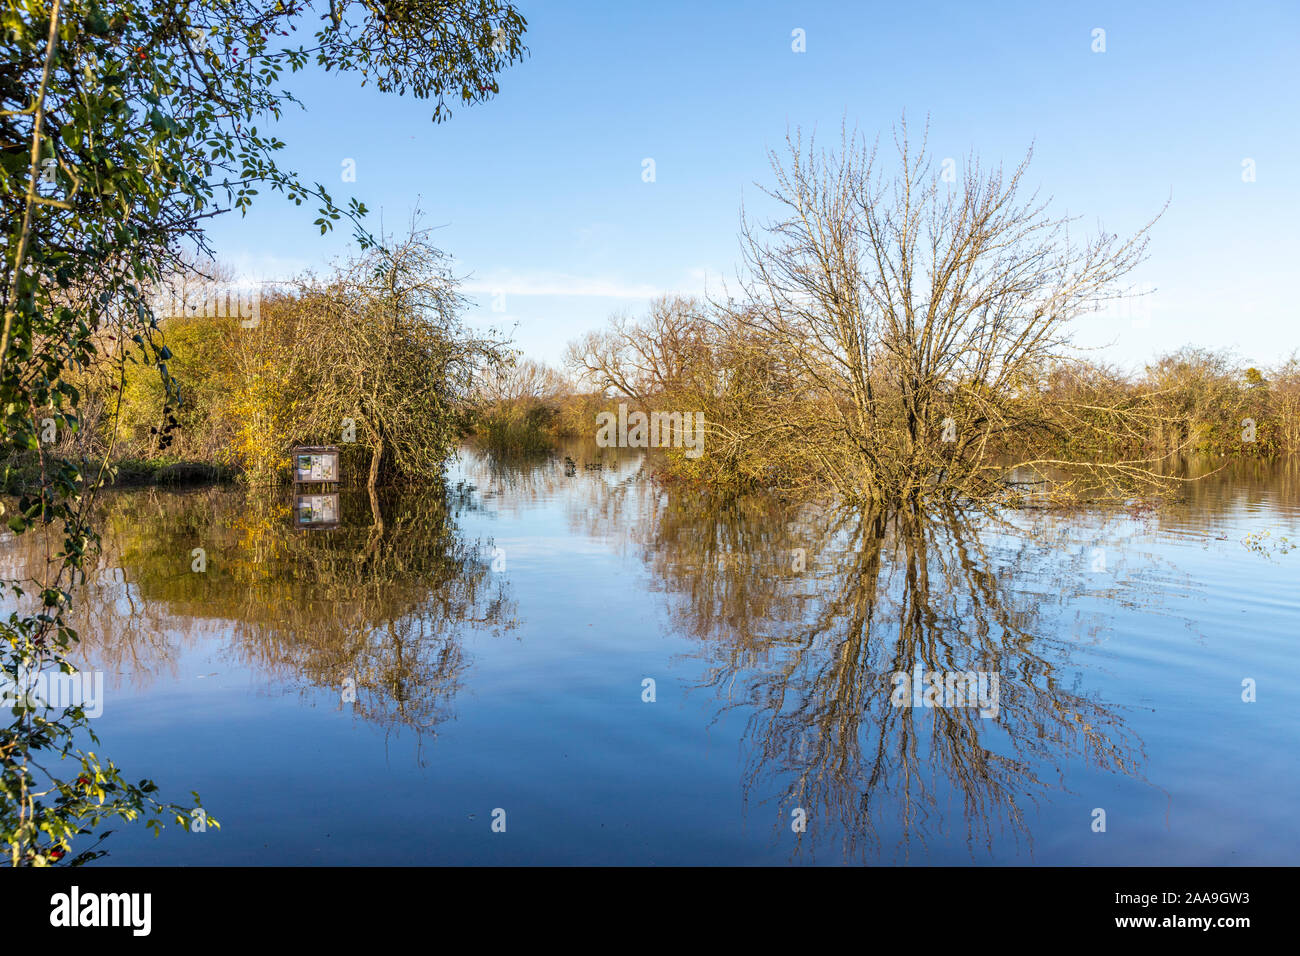 The River Severn flooded at Coombe Hill Canal and Meadows Nature Reserve, south of Tewkesbury, Gloucestershire UK on 18/11/2019 Stock Photo